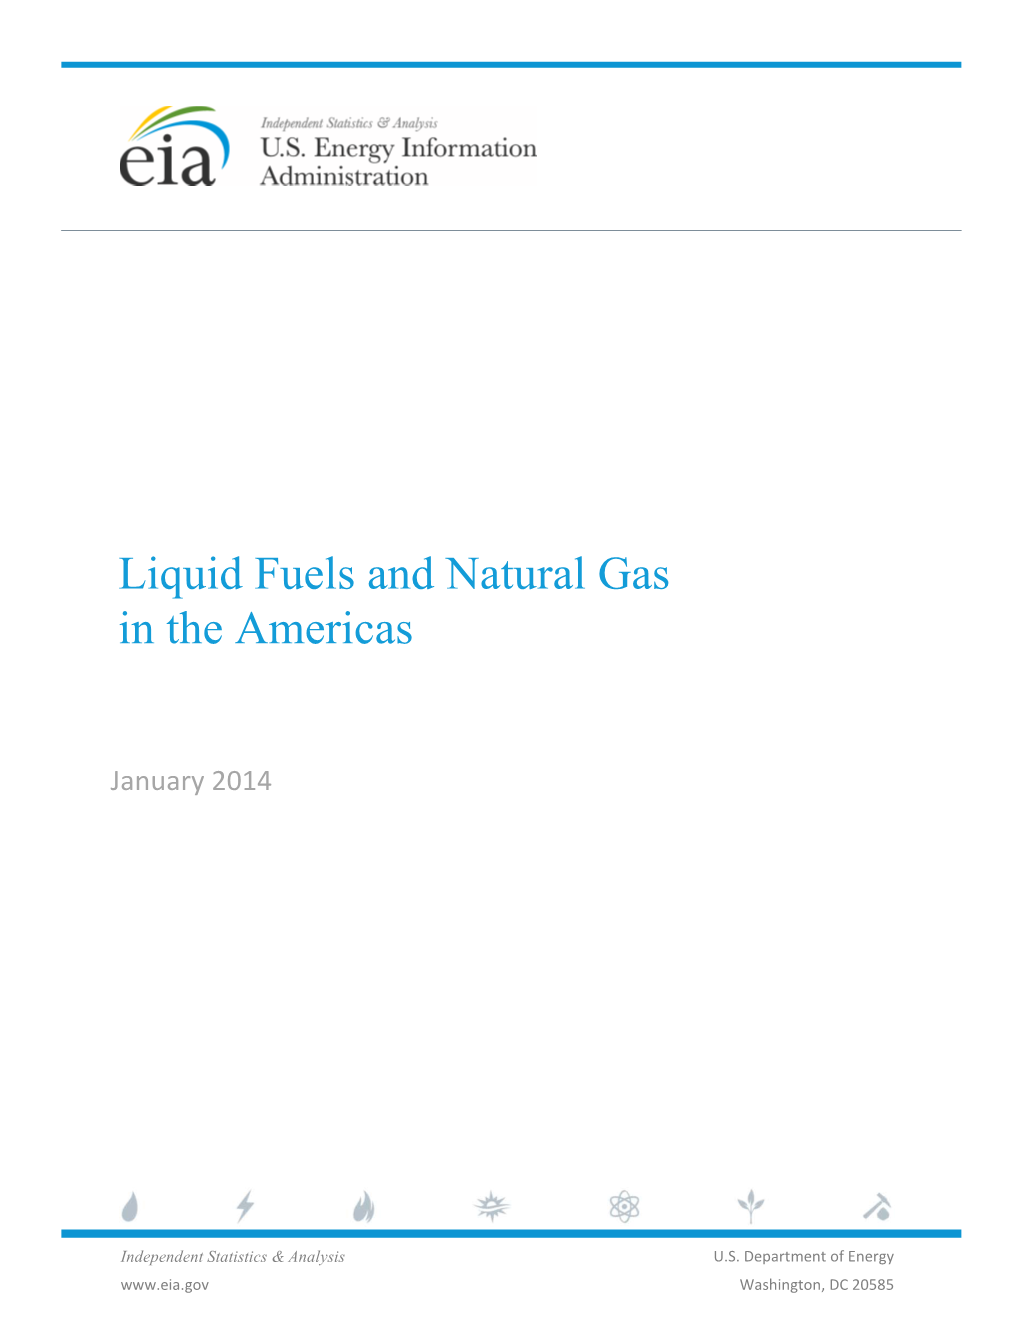 Liquid Fuels and Natural Gas in the Americas